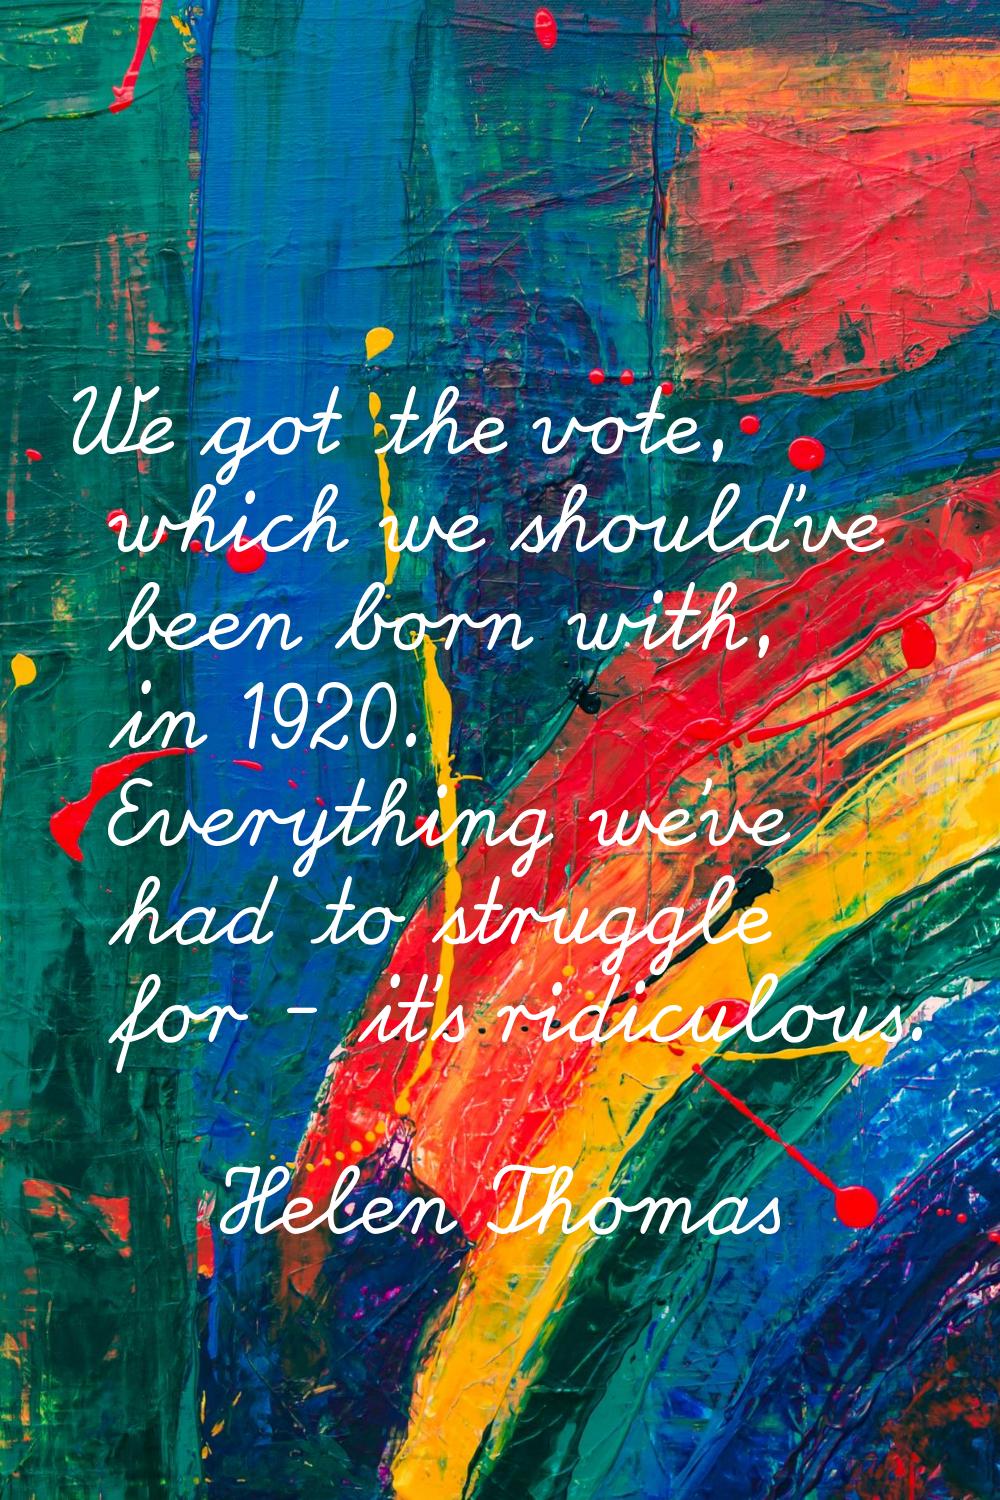 We got the vote, which we should've been born with, in 1920. Everything we've had to struggle for -